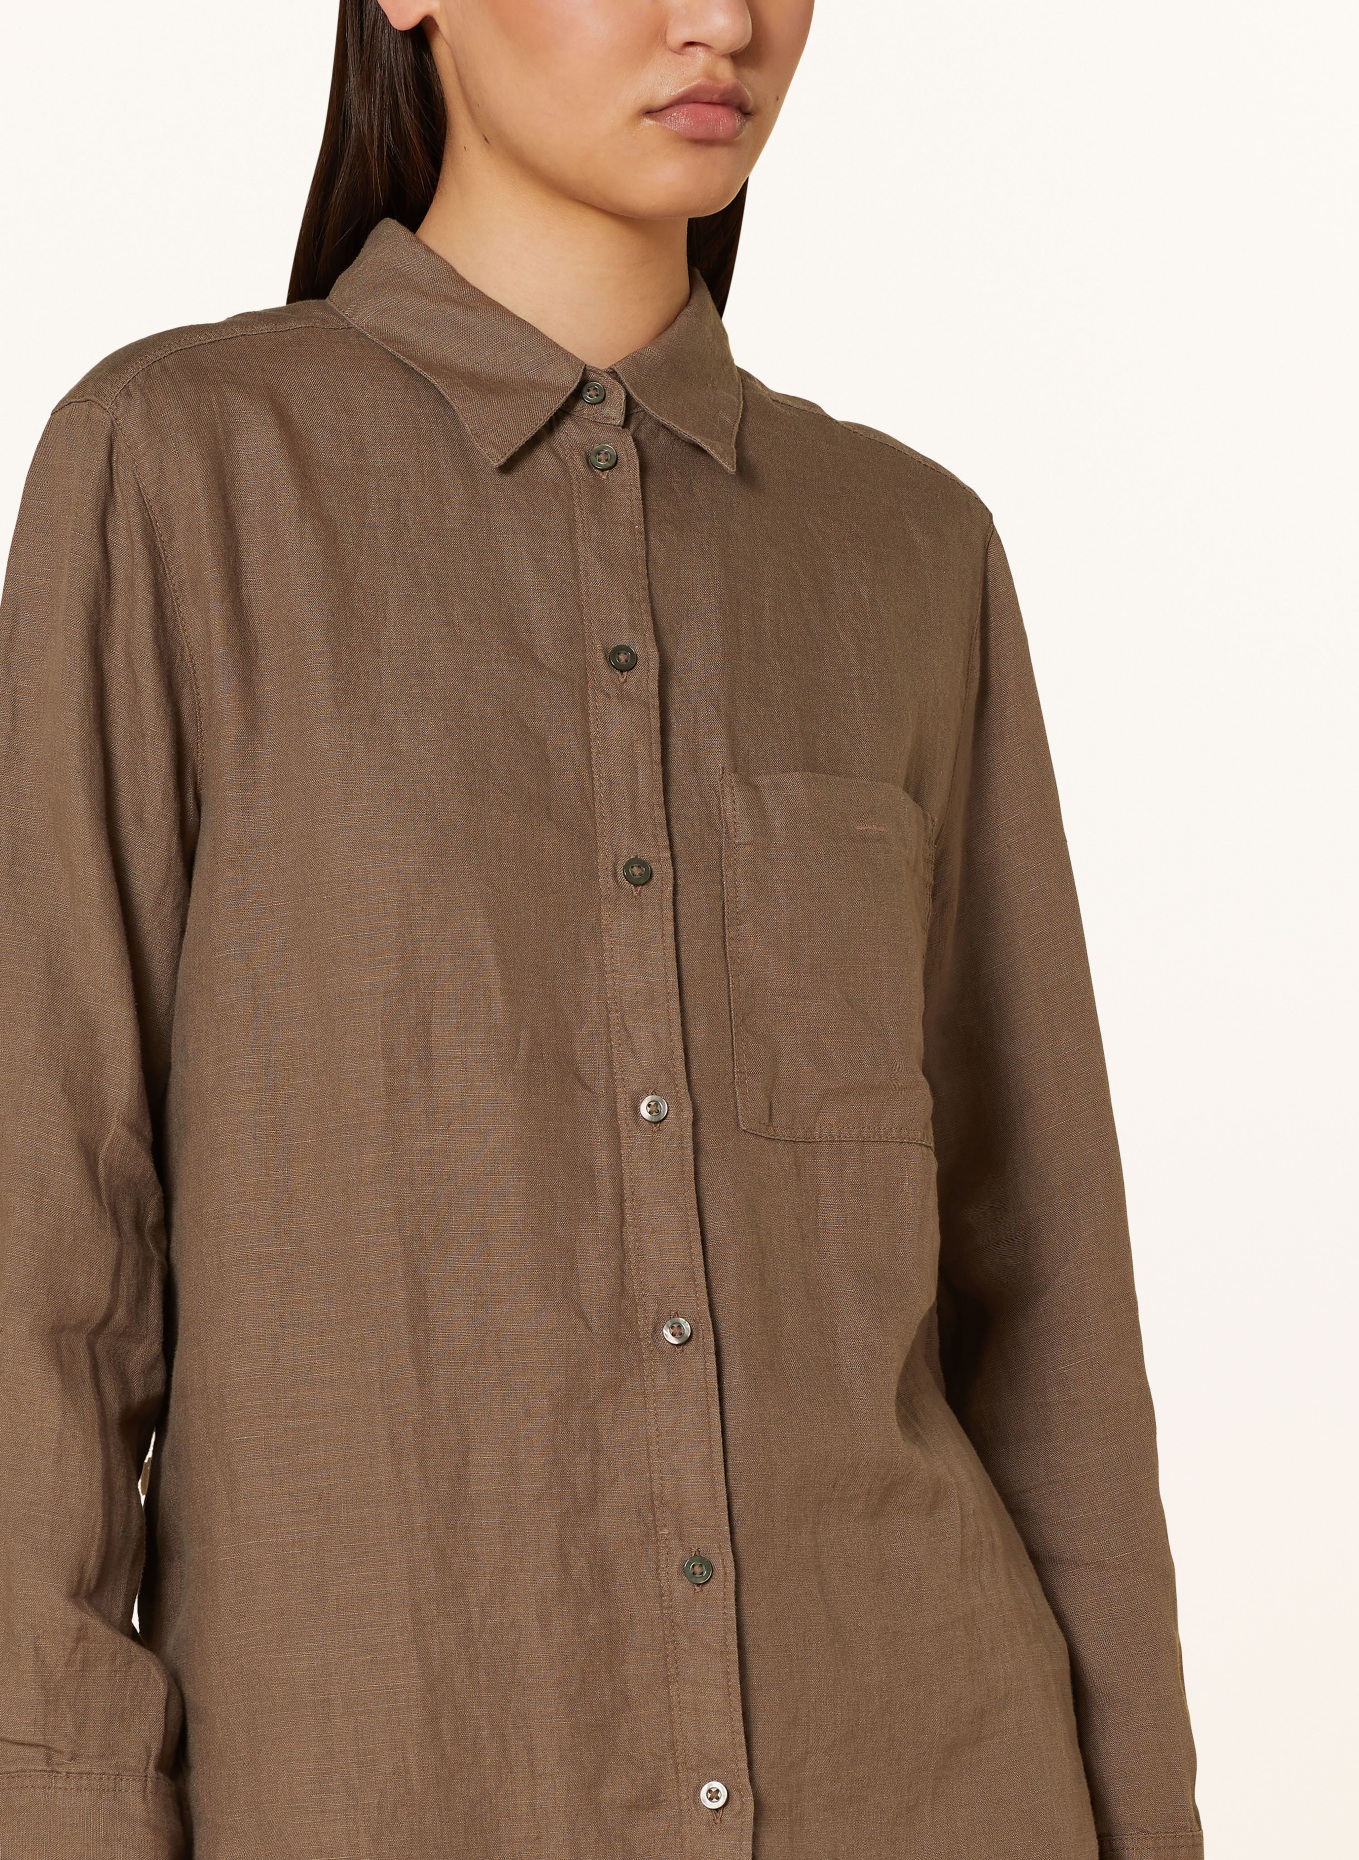 Marc O'Polo Shirt blouse made of linen, Color: BROWN (Image 4)